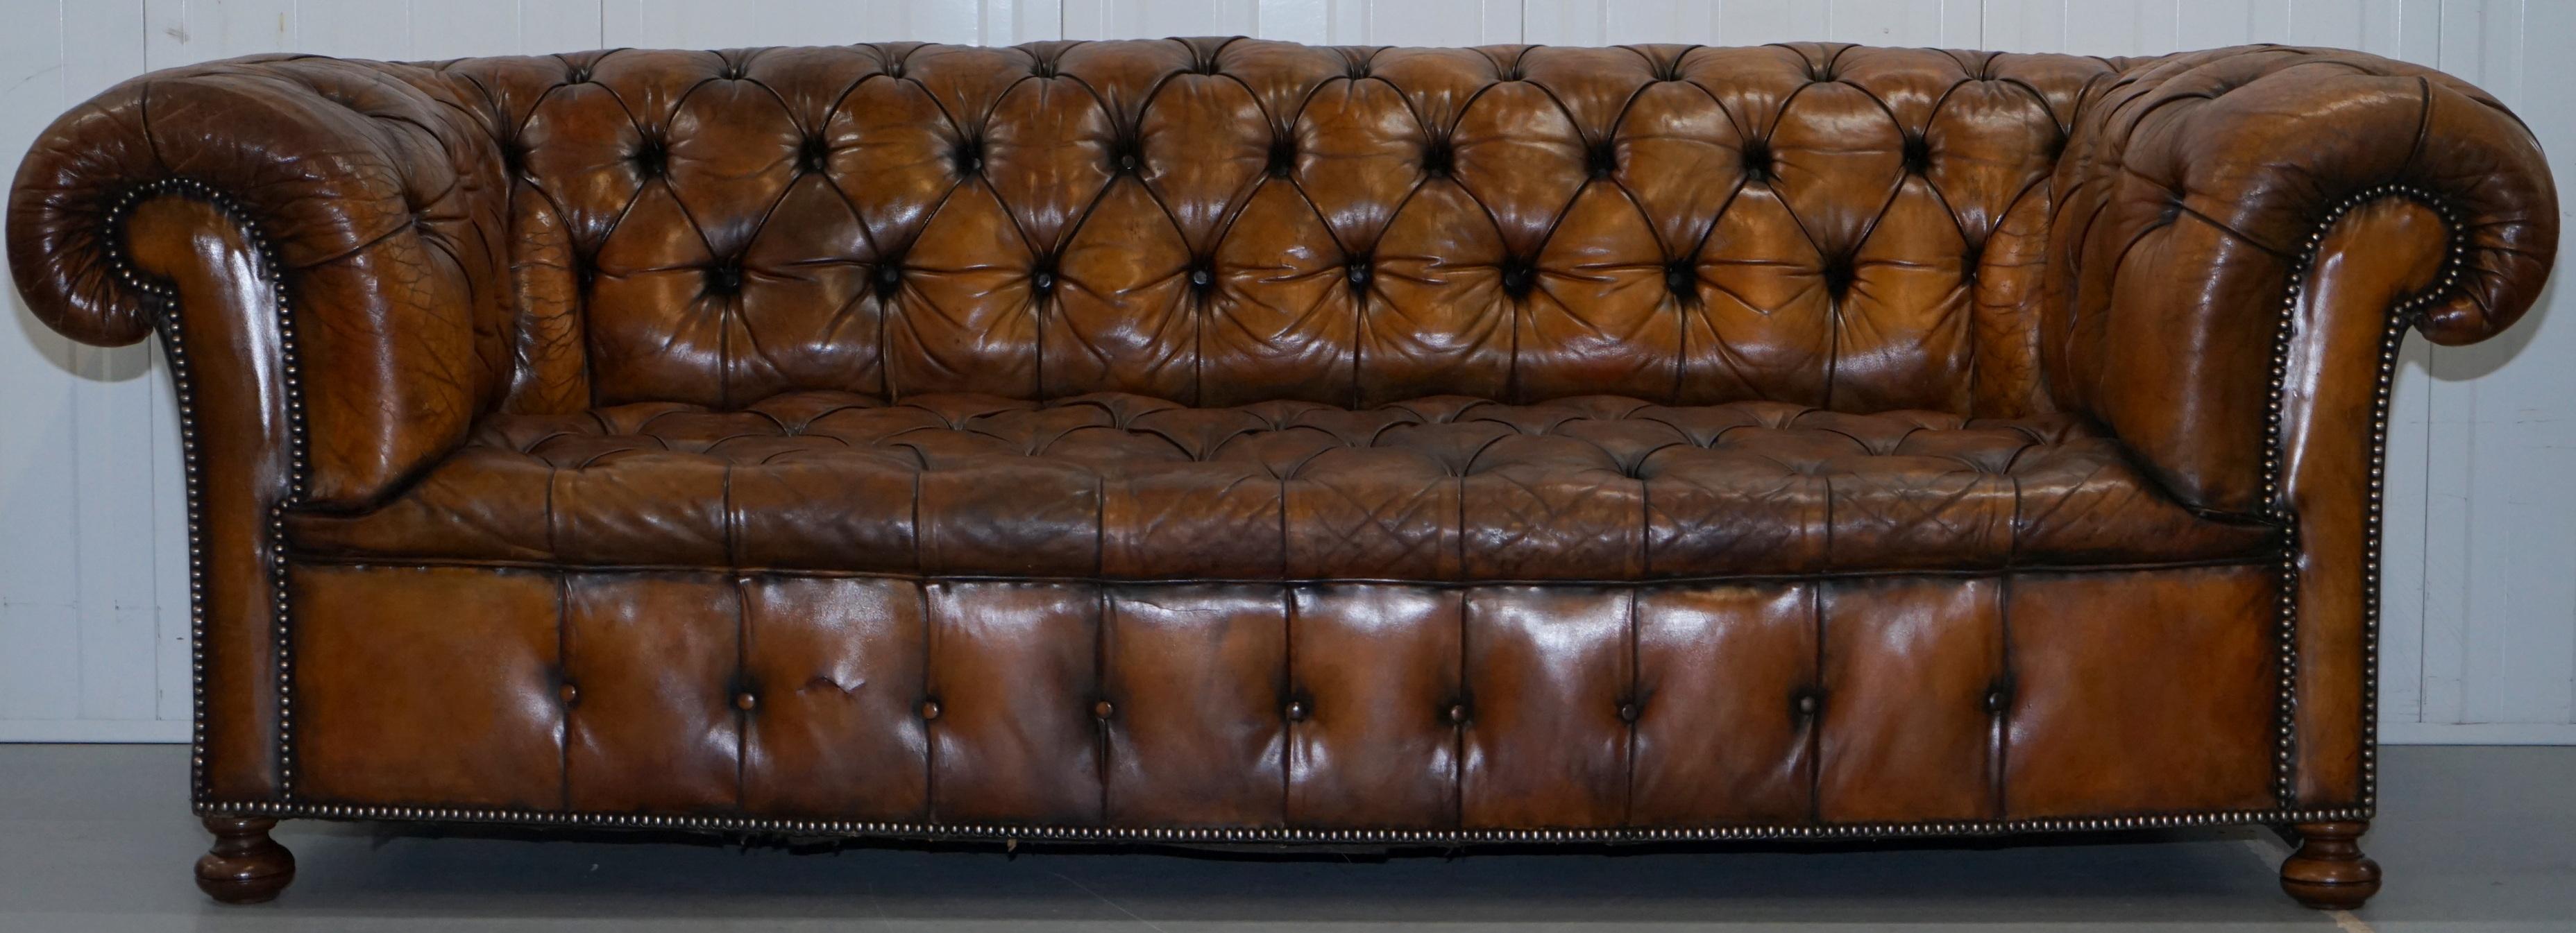 We are delighted to offer for sale this stunning exceptionally rare original early Victorian tobacco brown leather fully restored Chesterfield buttoned sofa

This is the model that everyone wants, it is the 100% perfect and correct oversized club